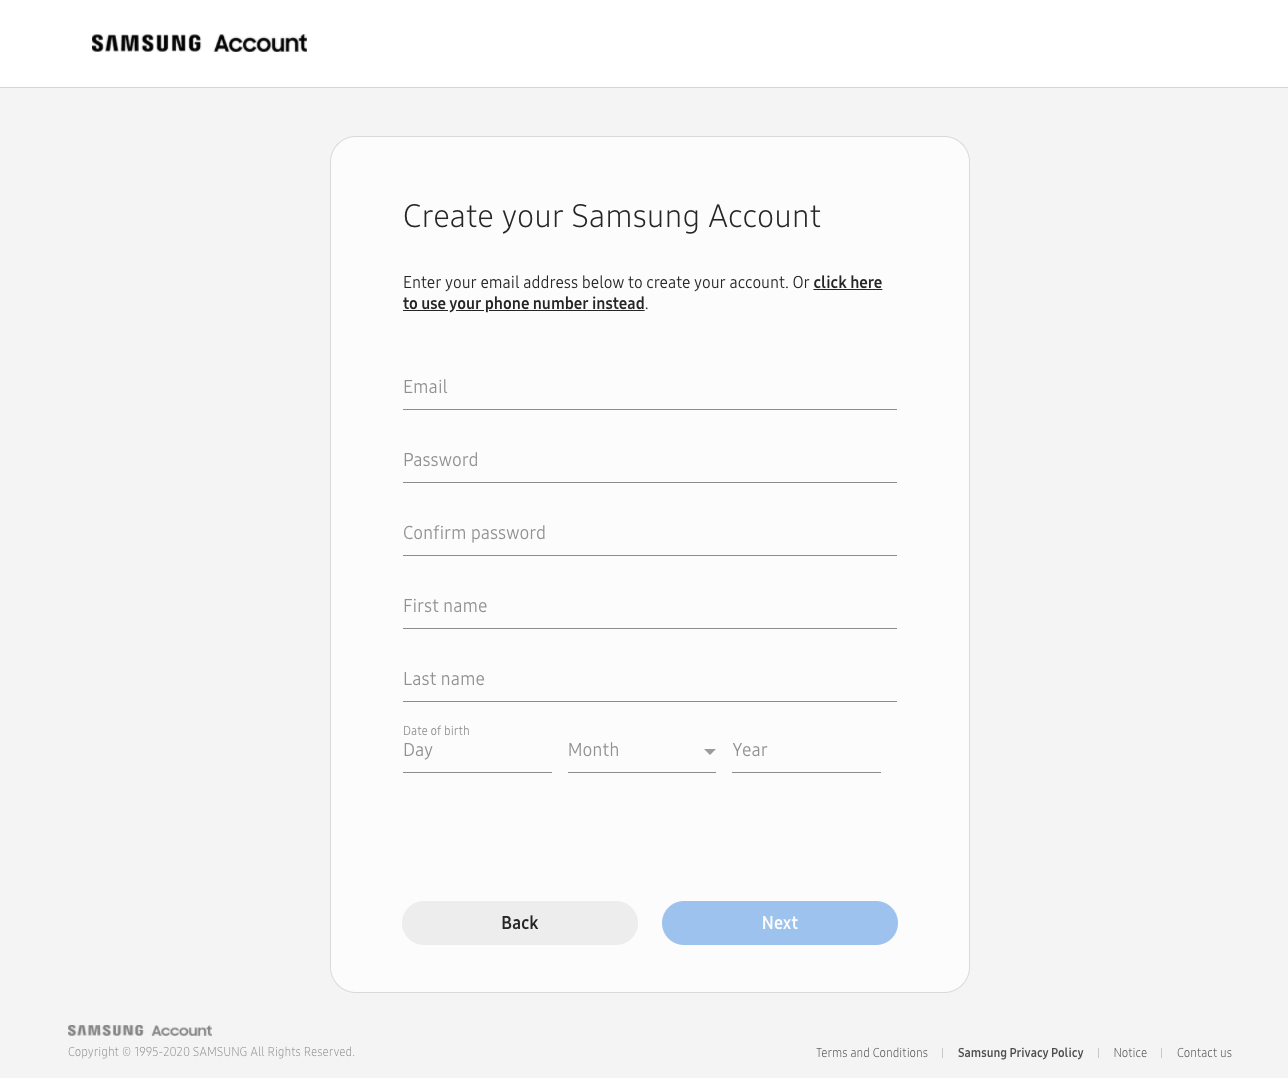 create Samsung account – enter the details